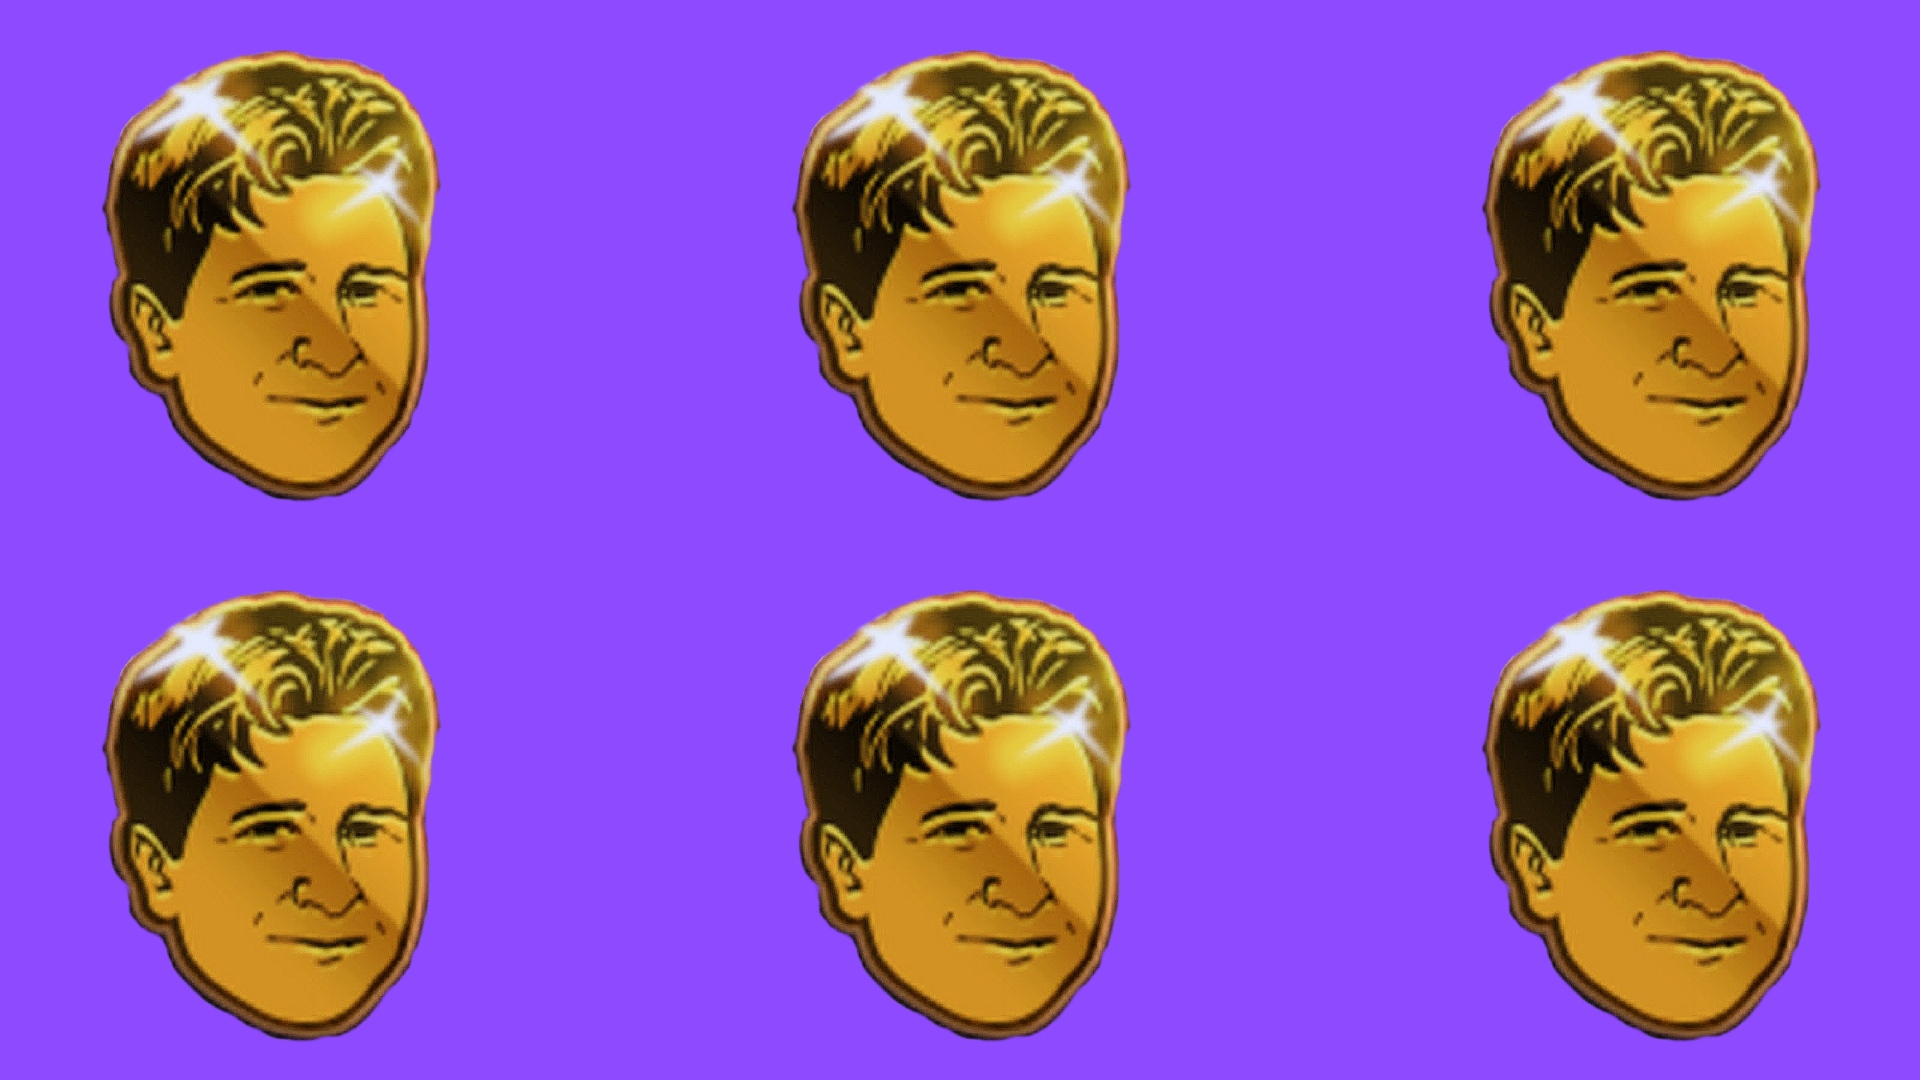 Twitch's Golden Kappa emote does exist – but everyone is happy about it | The Loadout